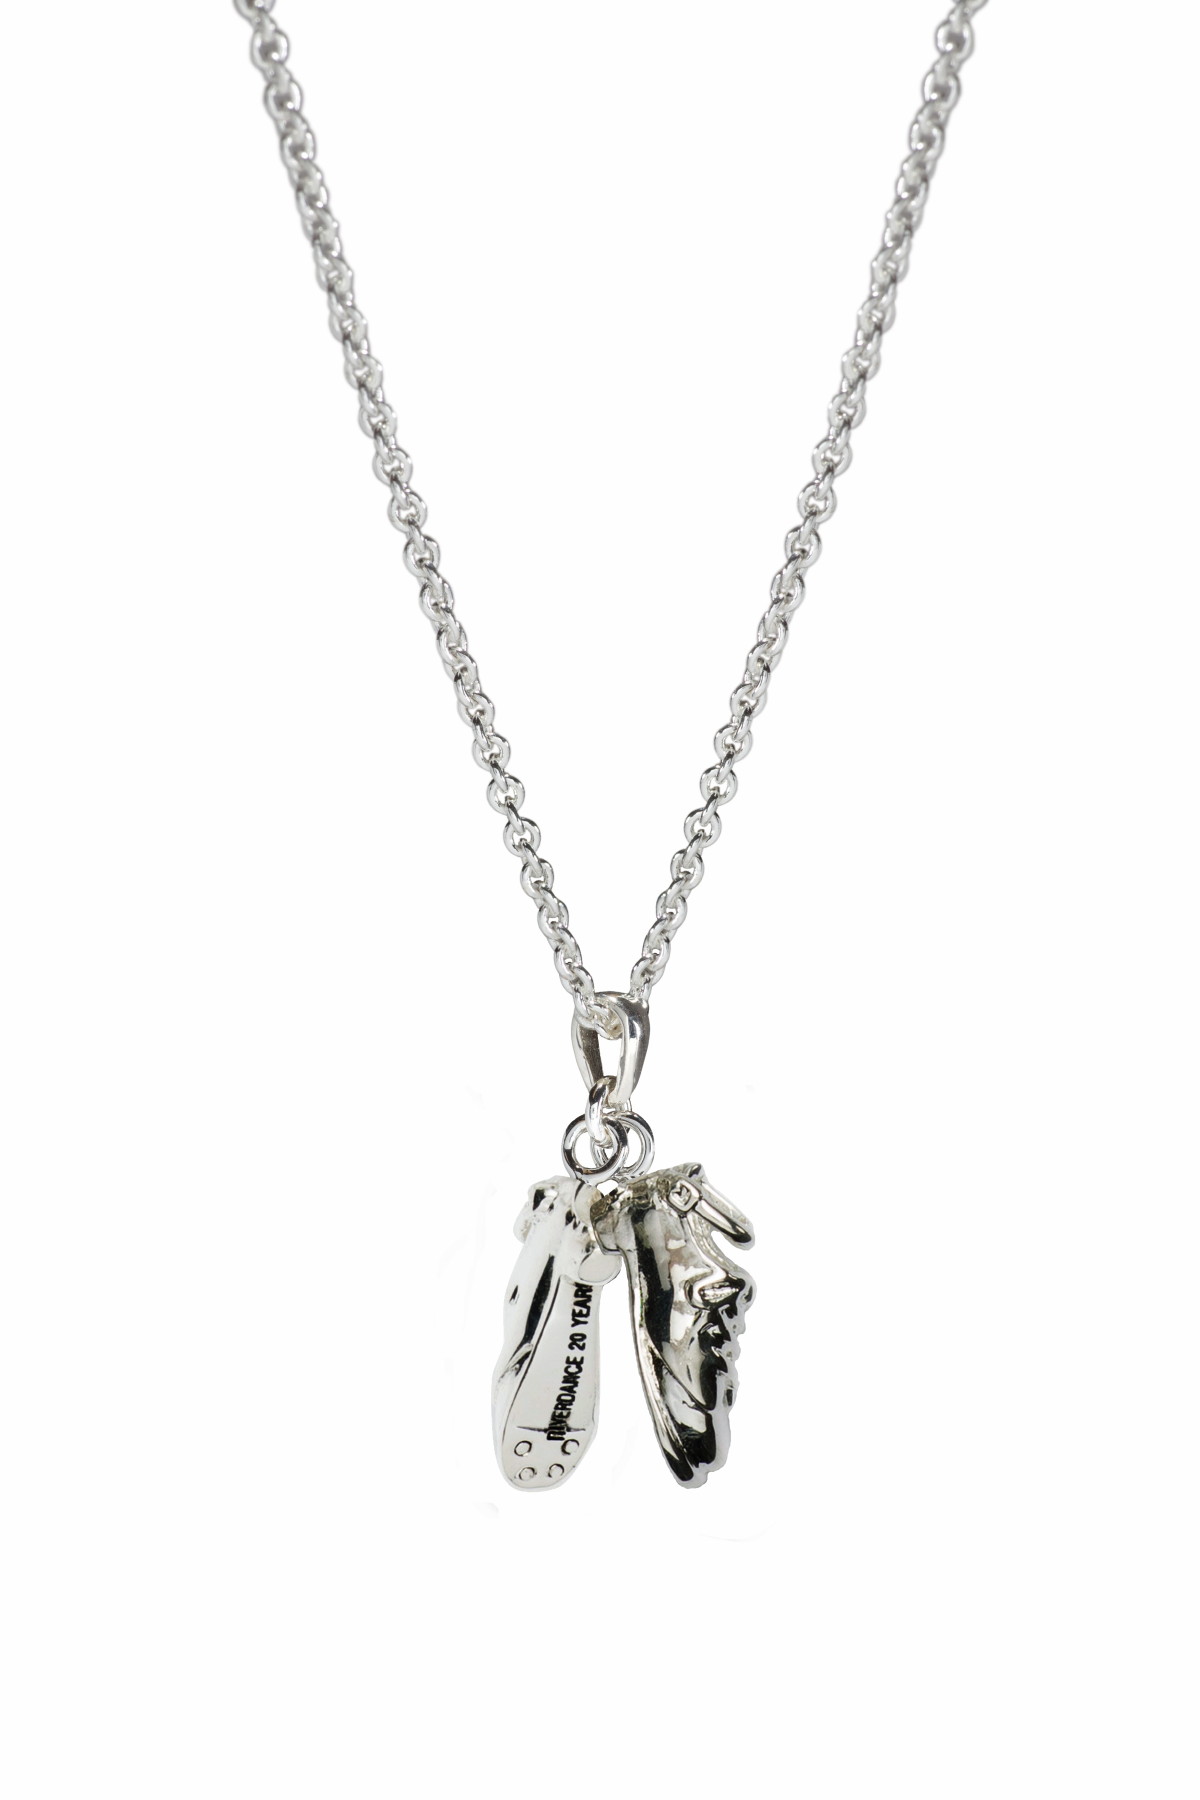 Riverdance20 Fine Chain Necklace with Heavy Dancing Shoes